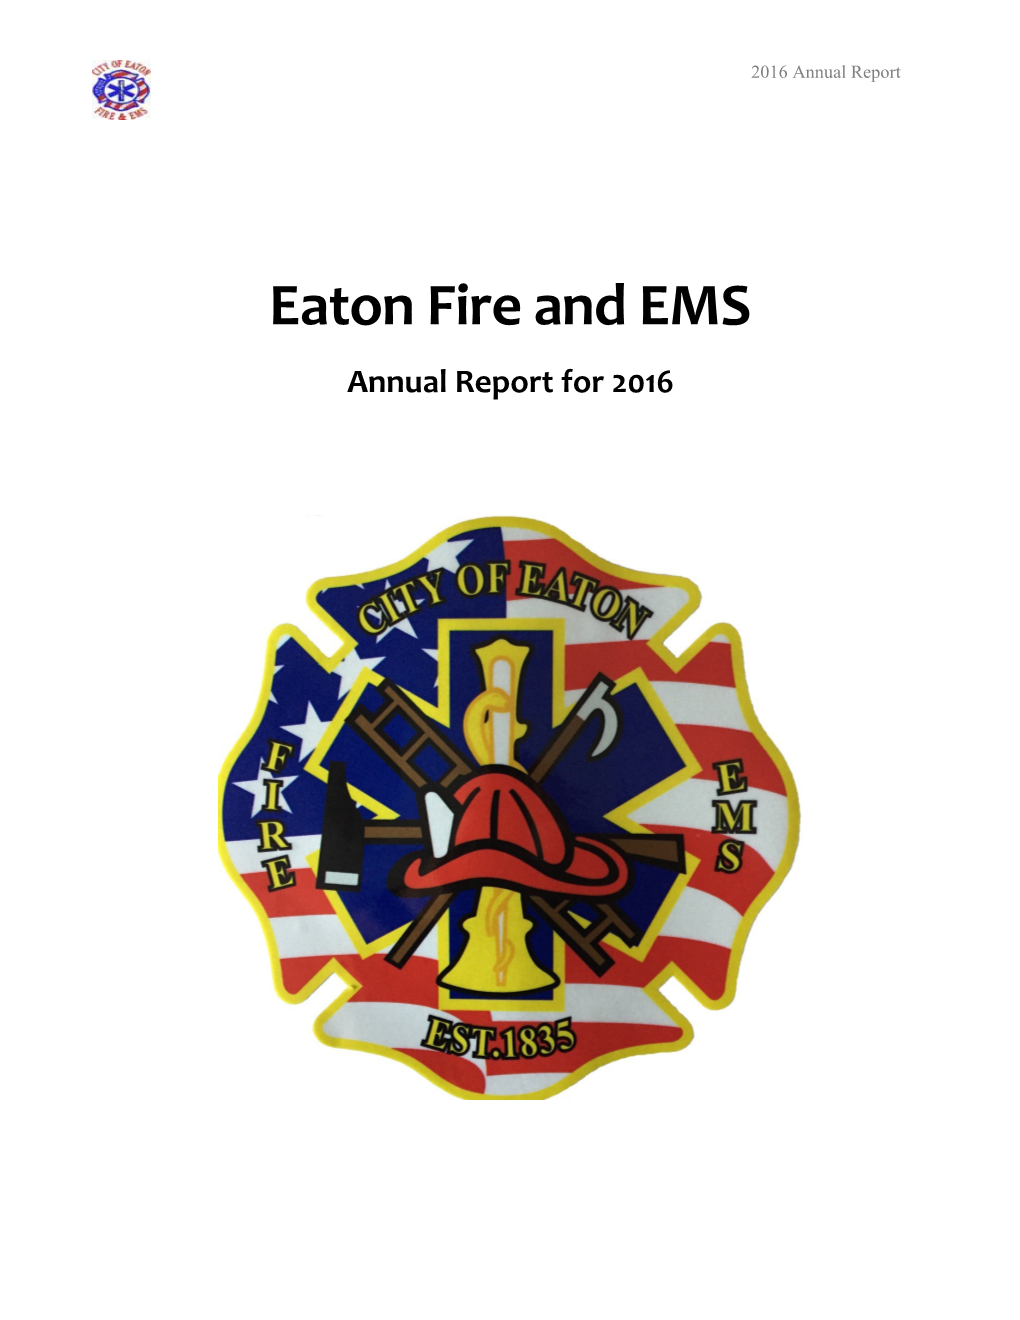 Eaton Fire and EMS